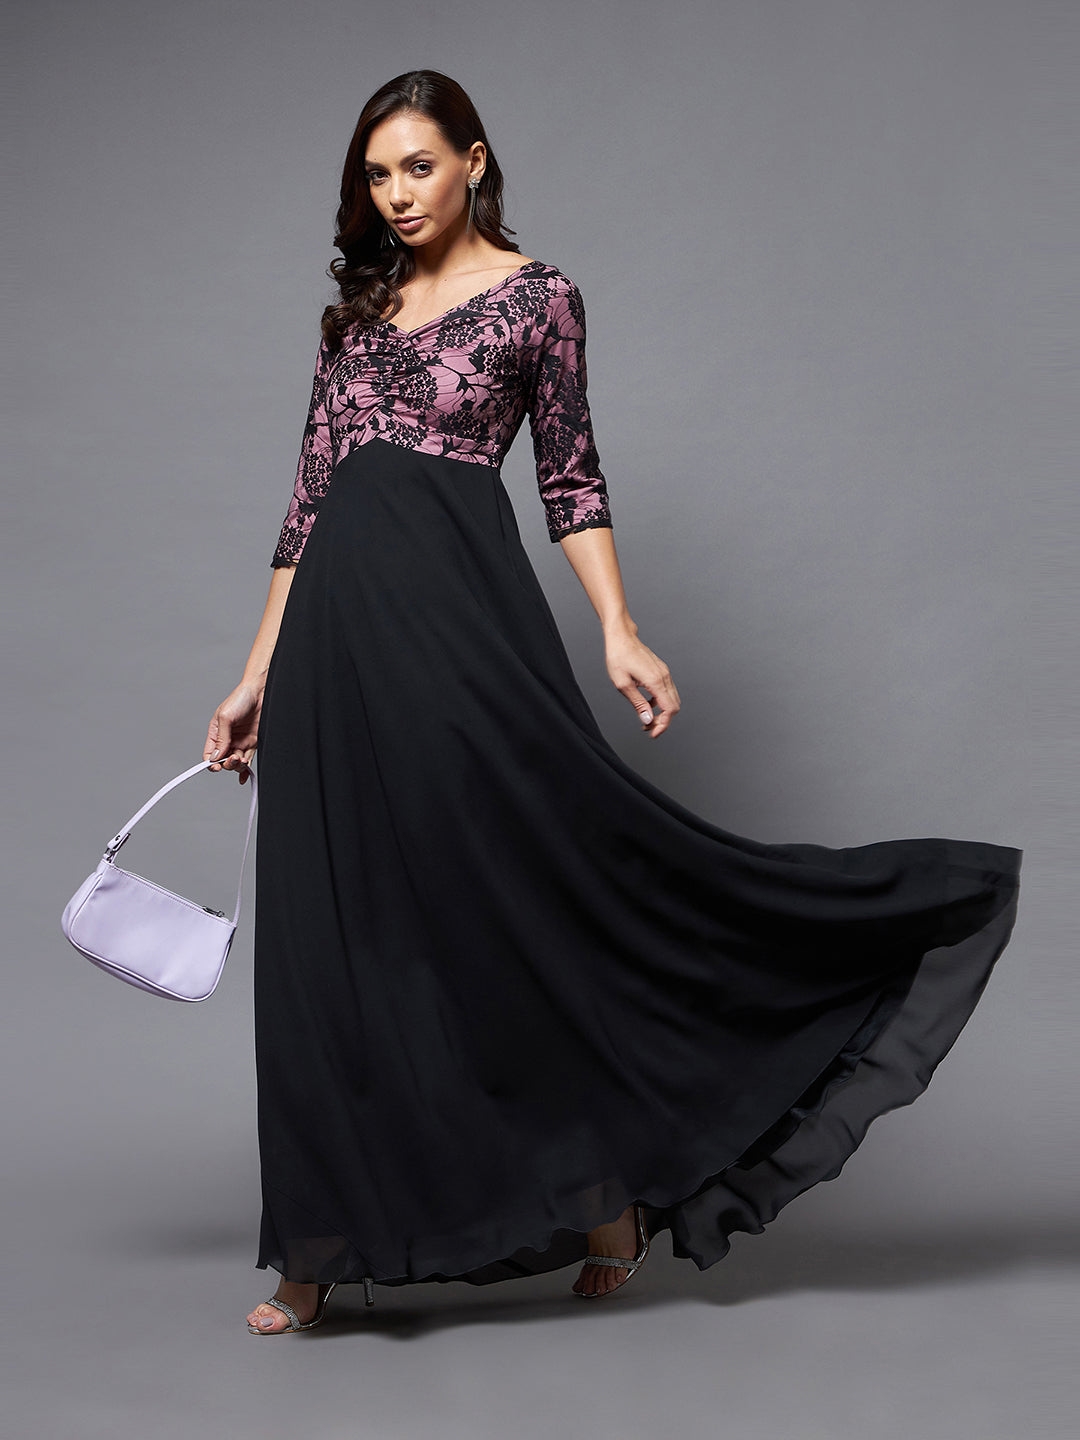 MISS CHASE | Black And Lavender Sweet heart neck 3/4 Sleeve Self Design Fit & Flare Maxi Dress